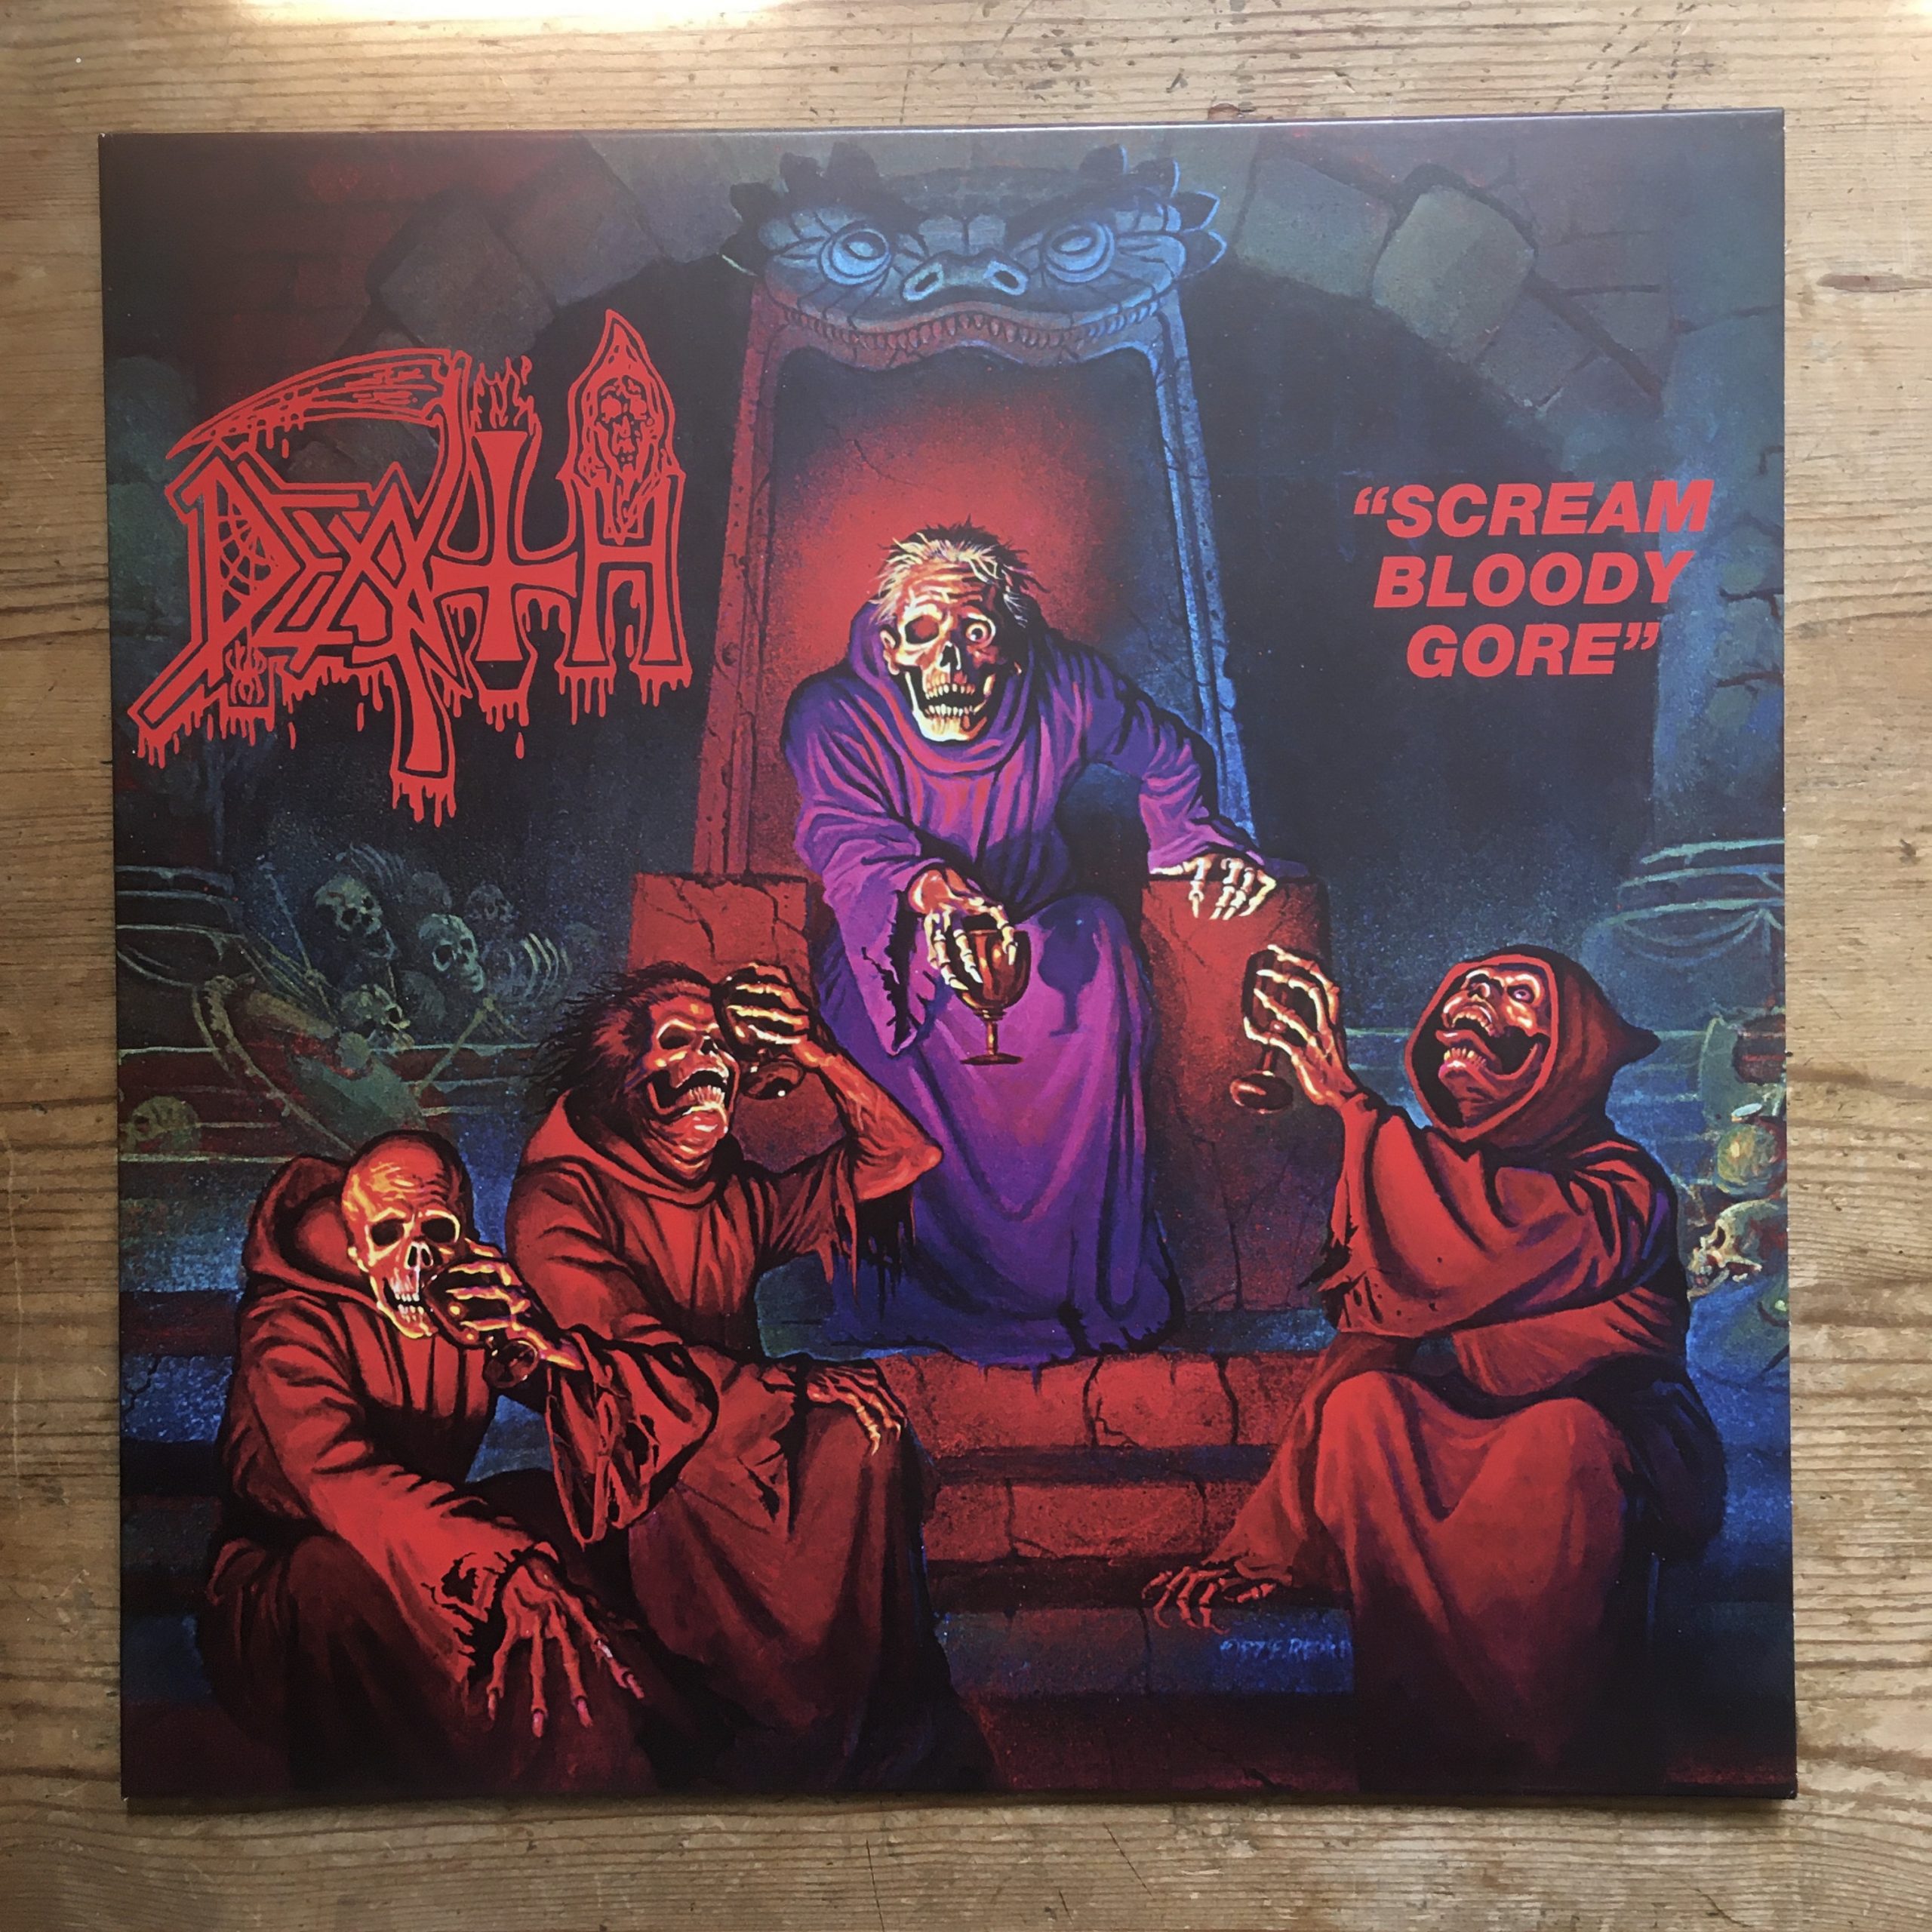 Photo of the Death - "Scream Bloody Gore" LP